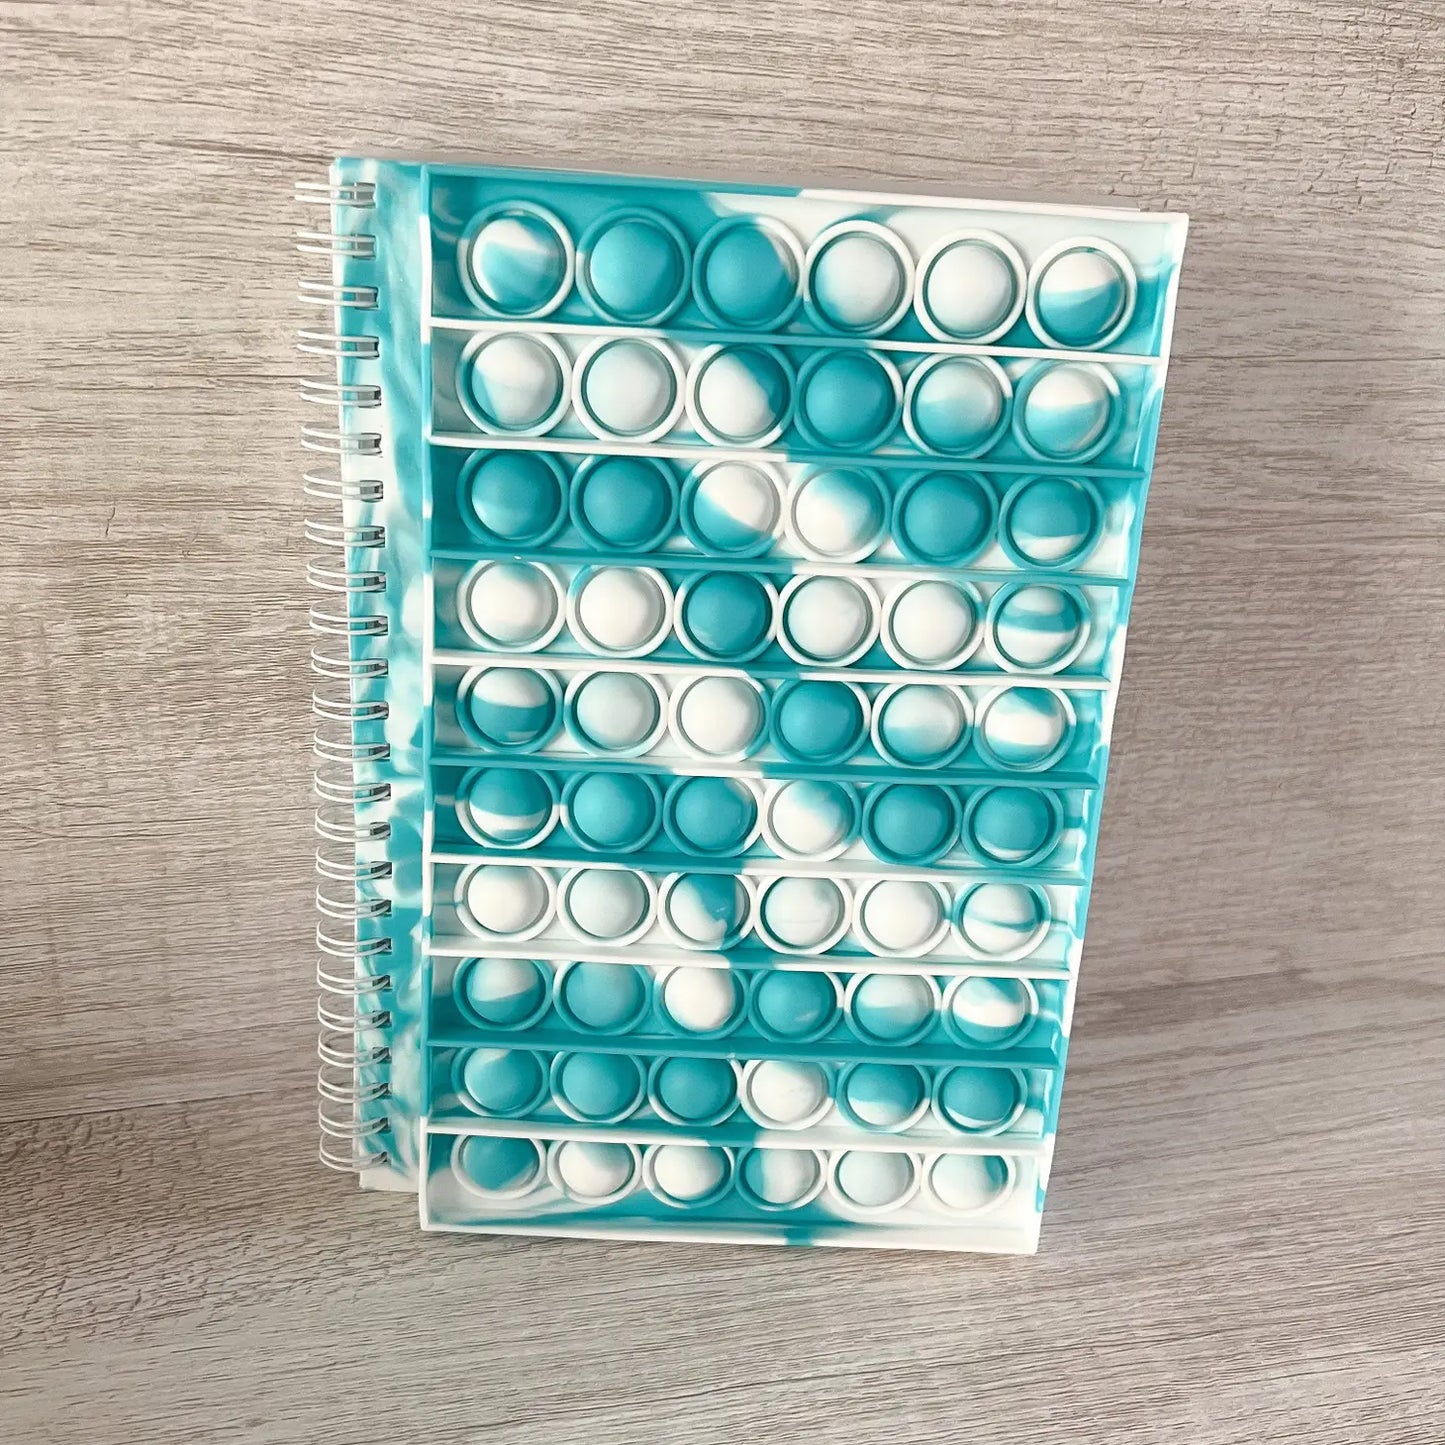 Sensory Pop Spiral Notebooks in various colors